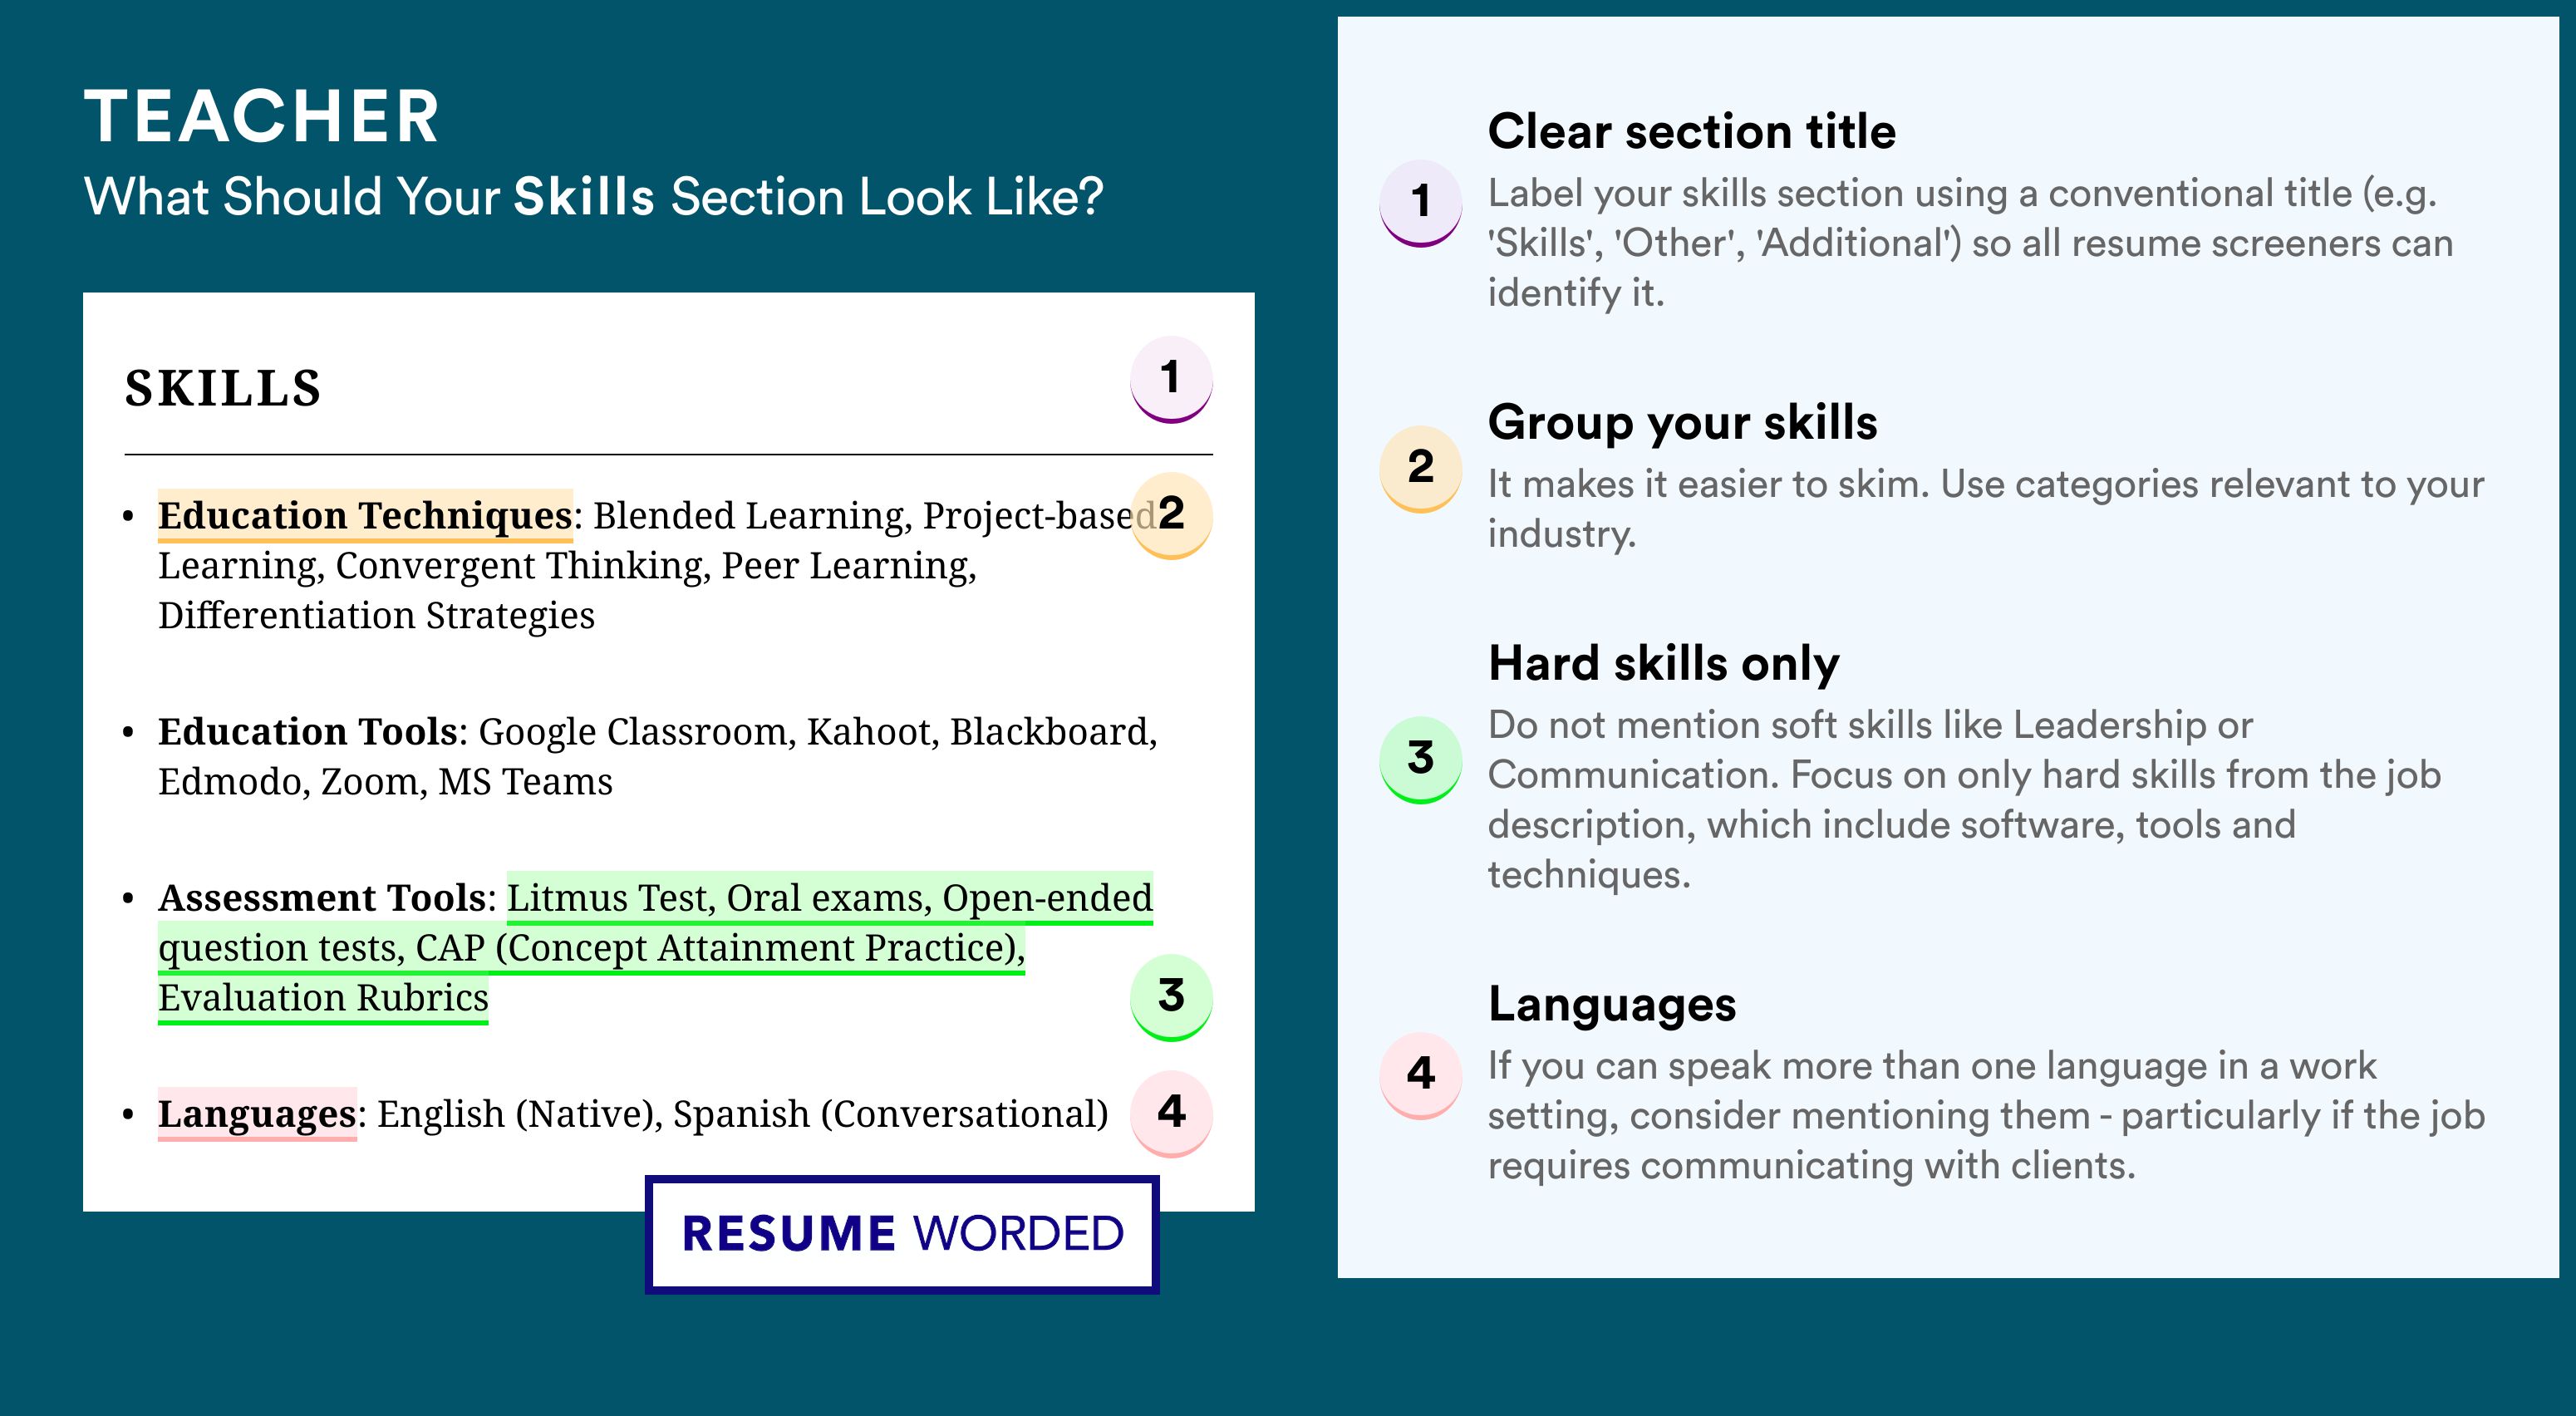 How To Write Your Skills Section - Teacher Roles